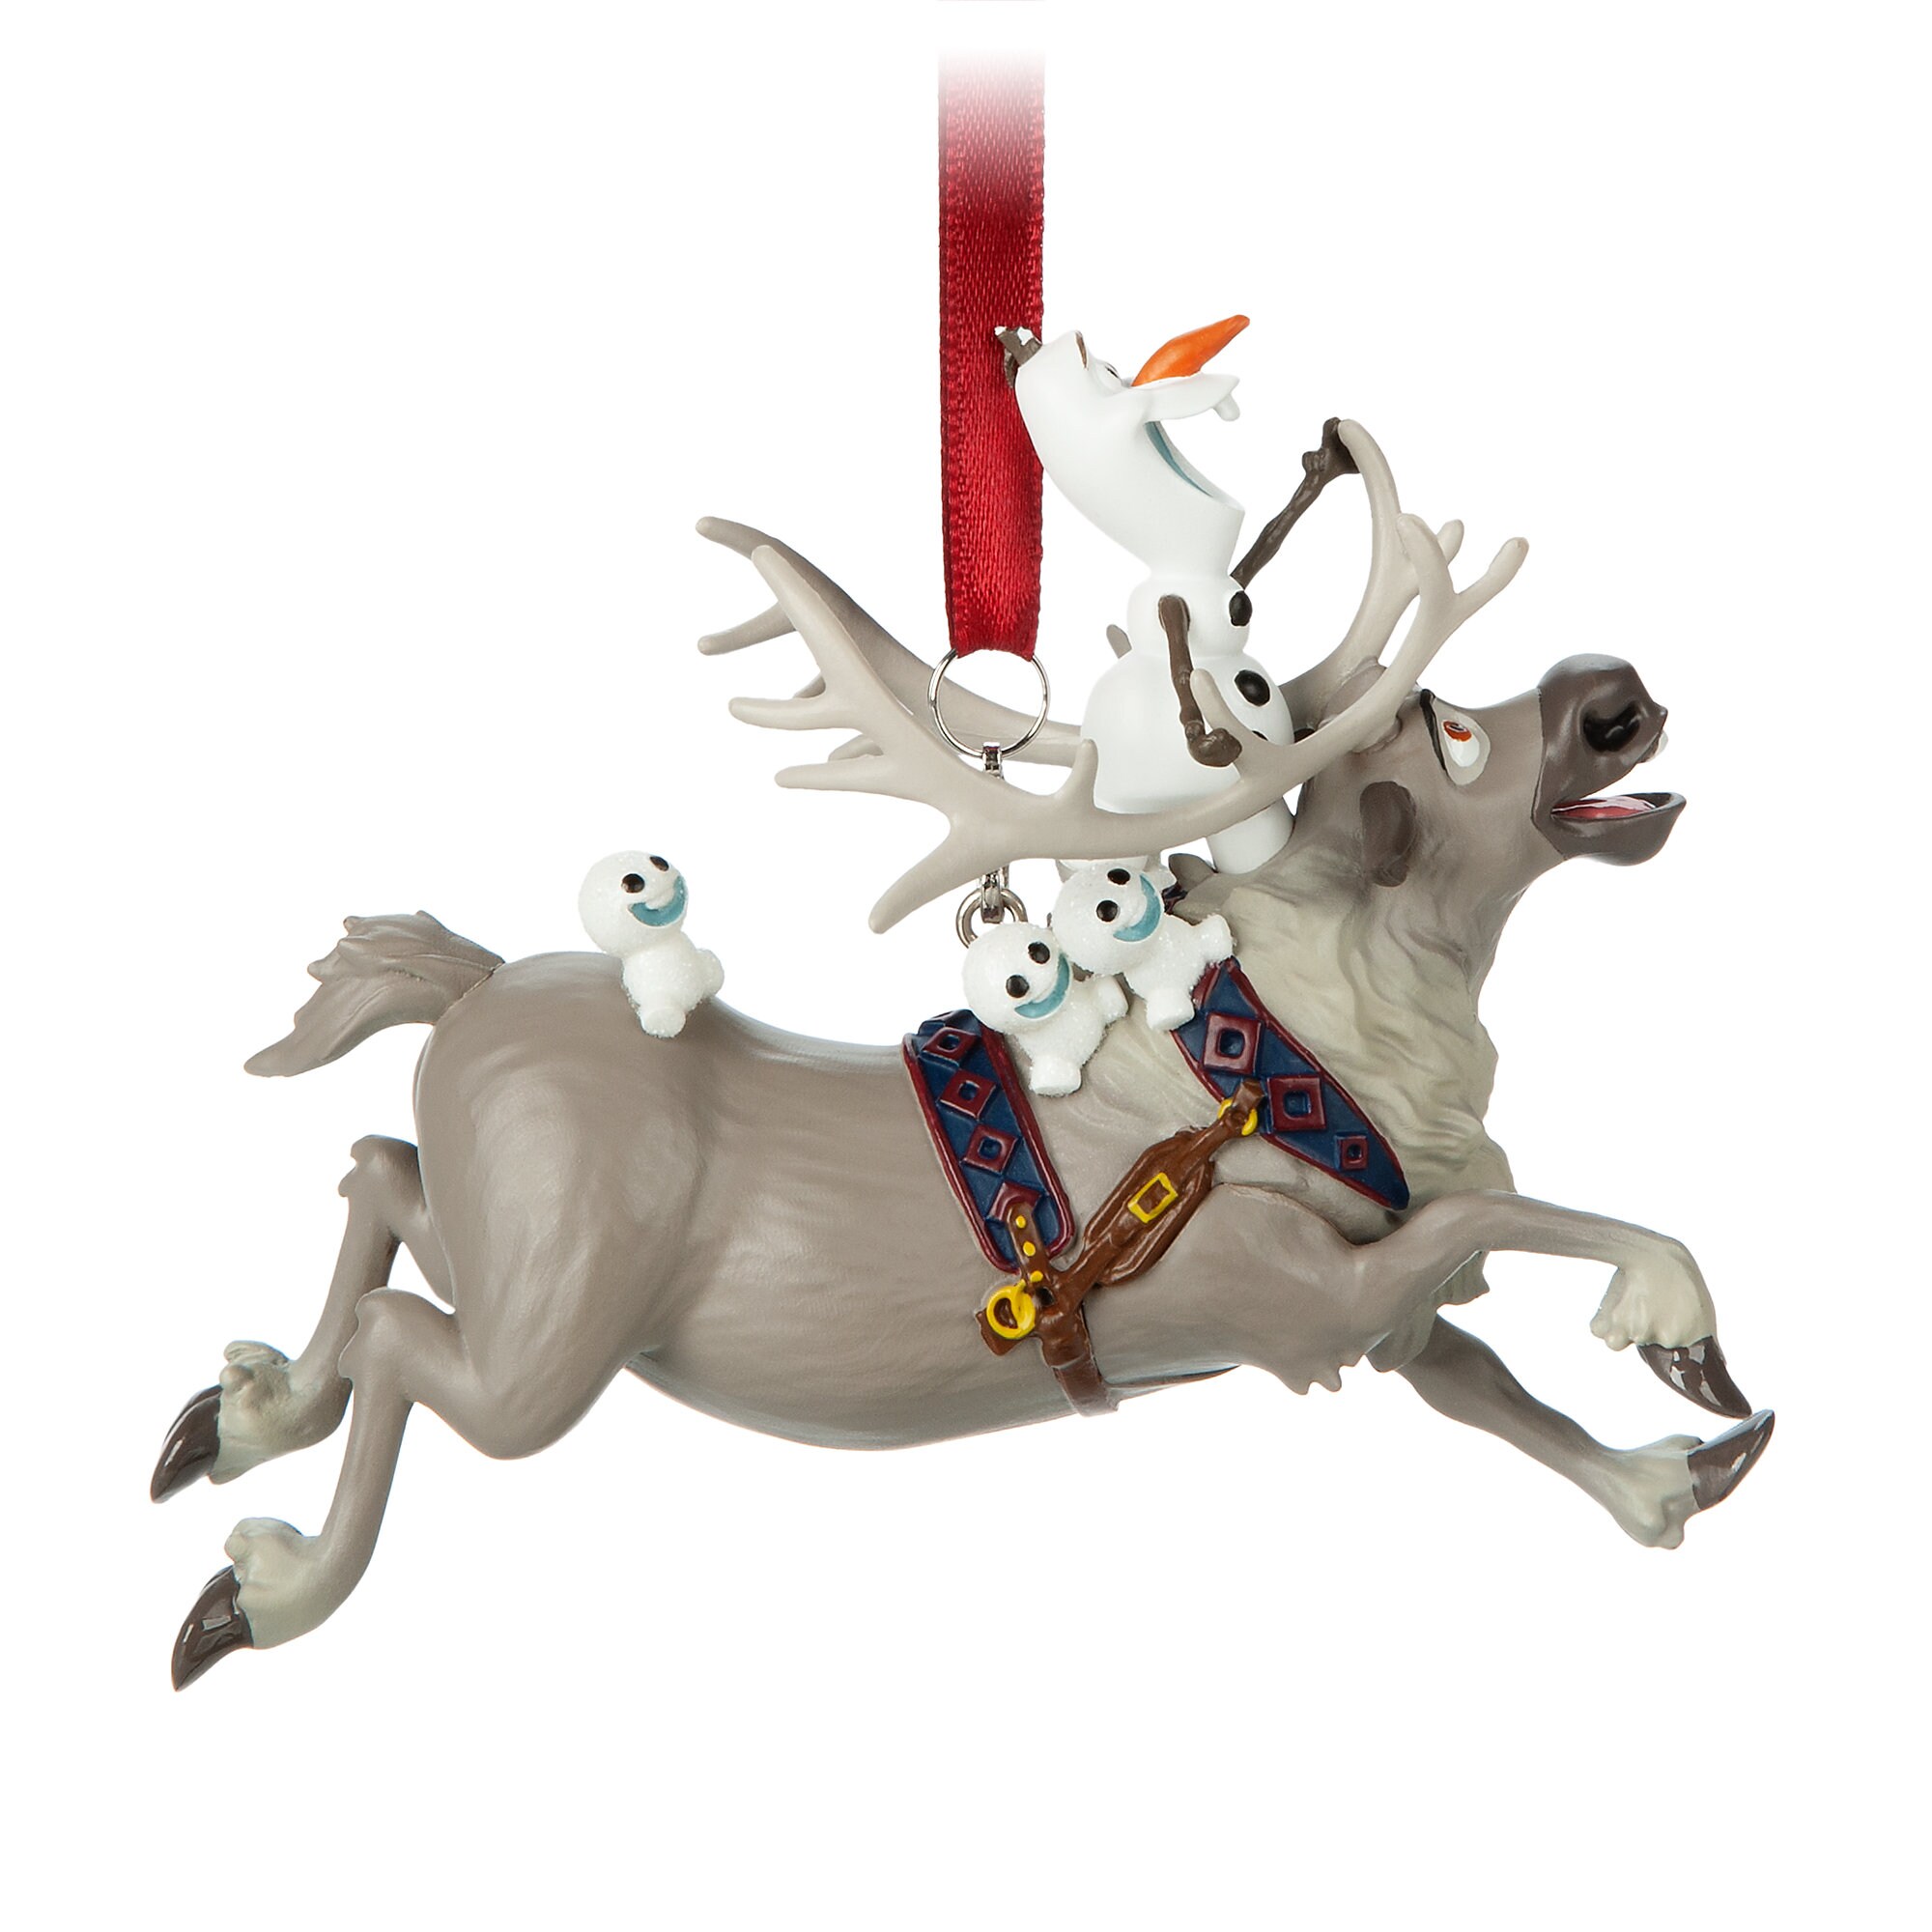 Olaf and Sven Figural Ornament - Frozen